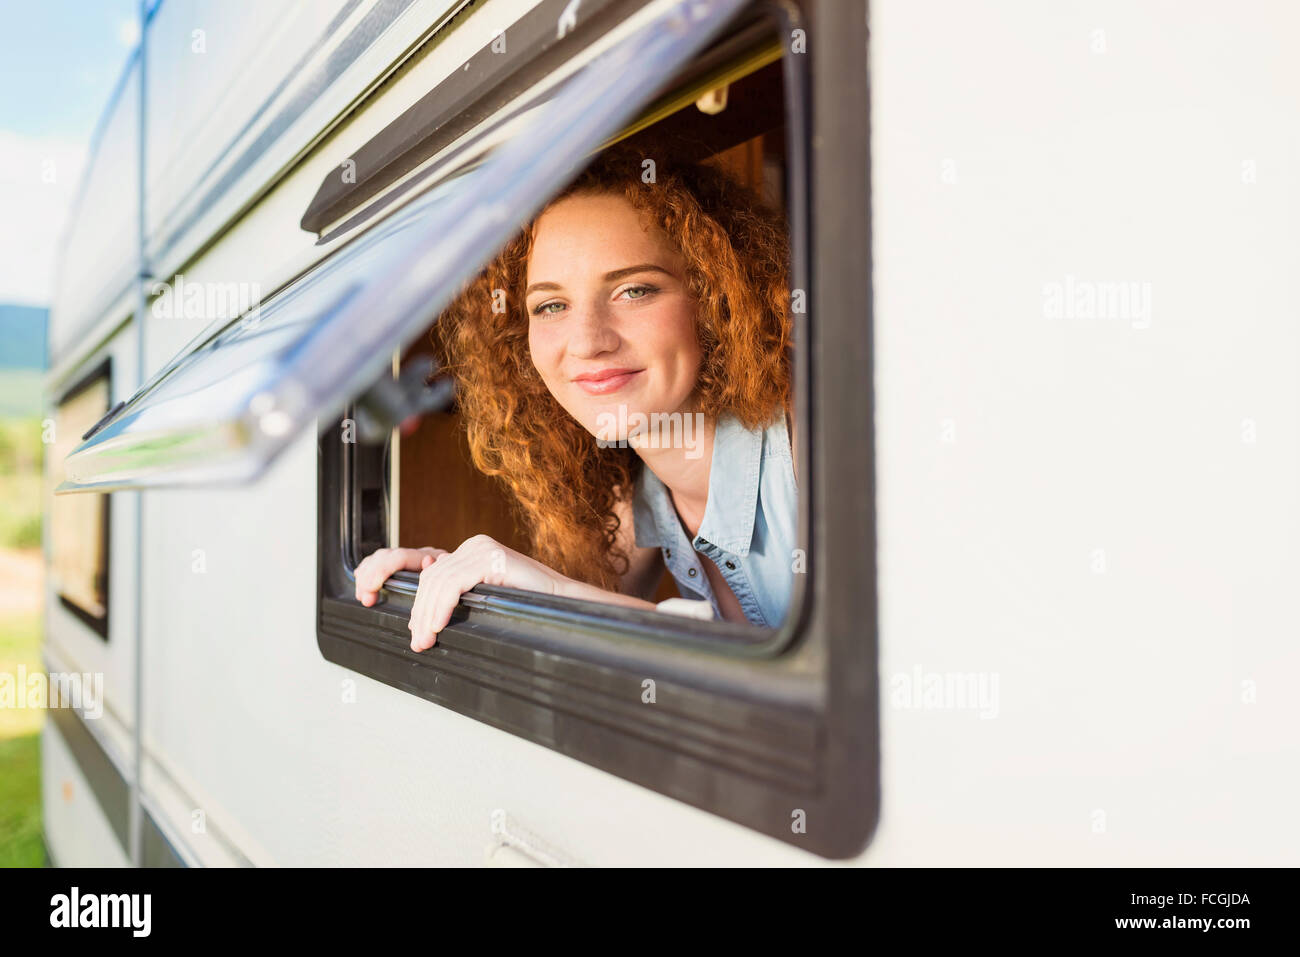 Portrit of smiling young woman  looking through window of caravan Stock Photo